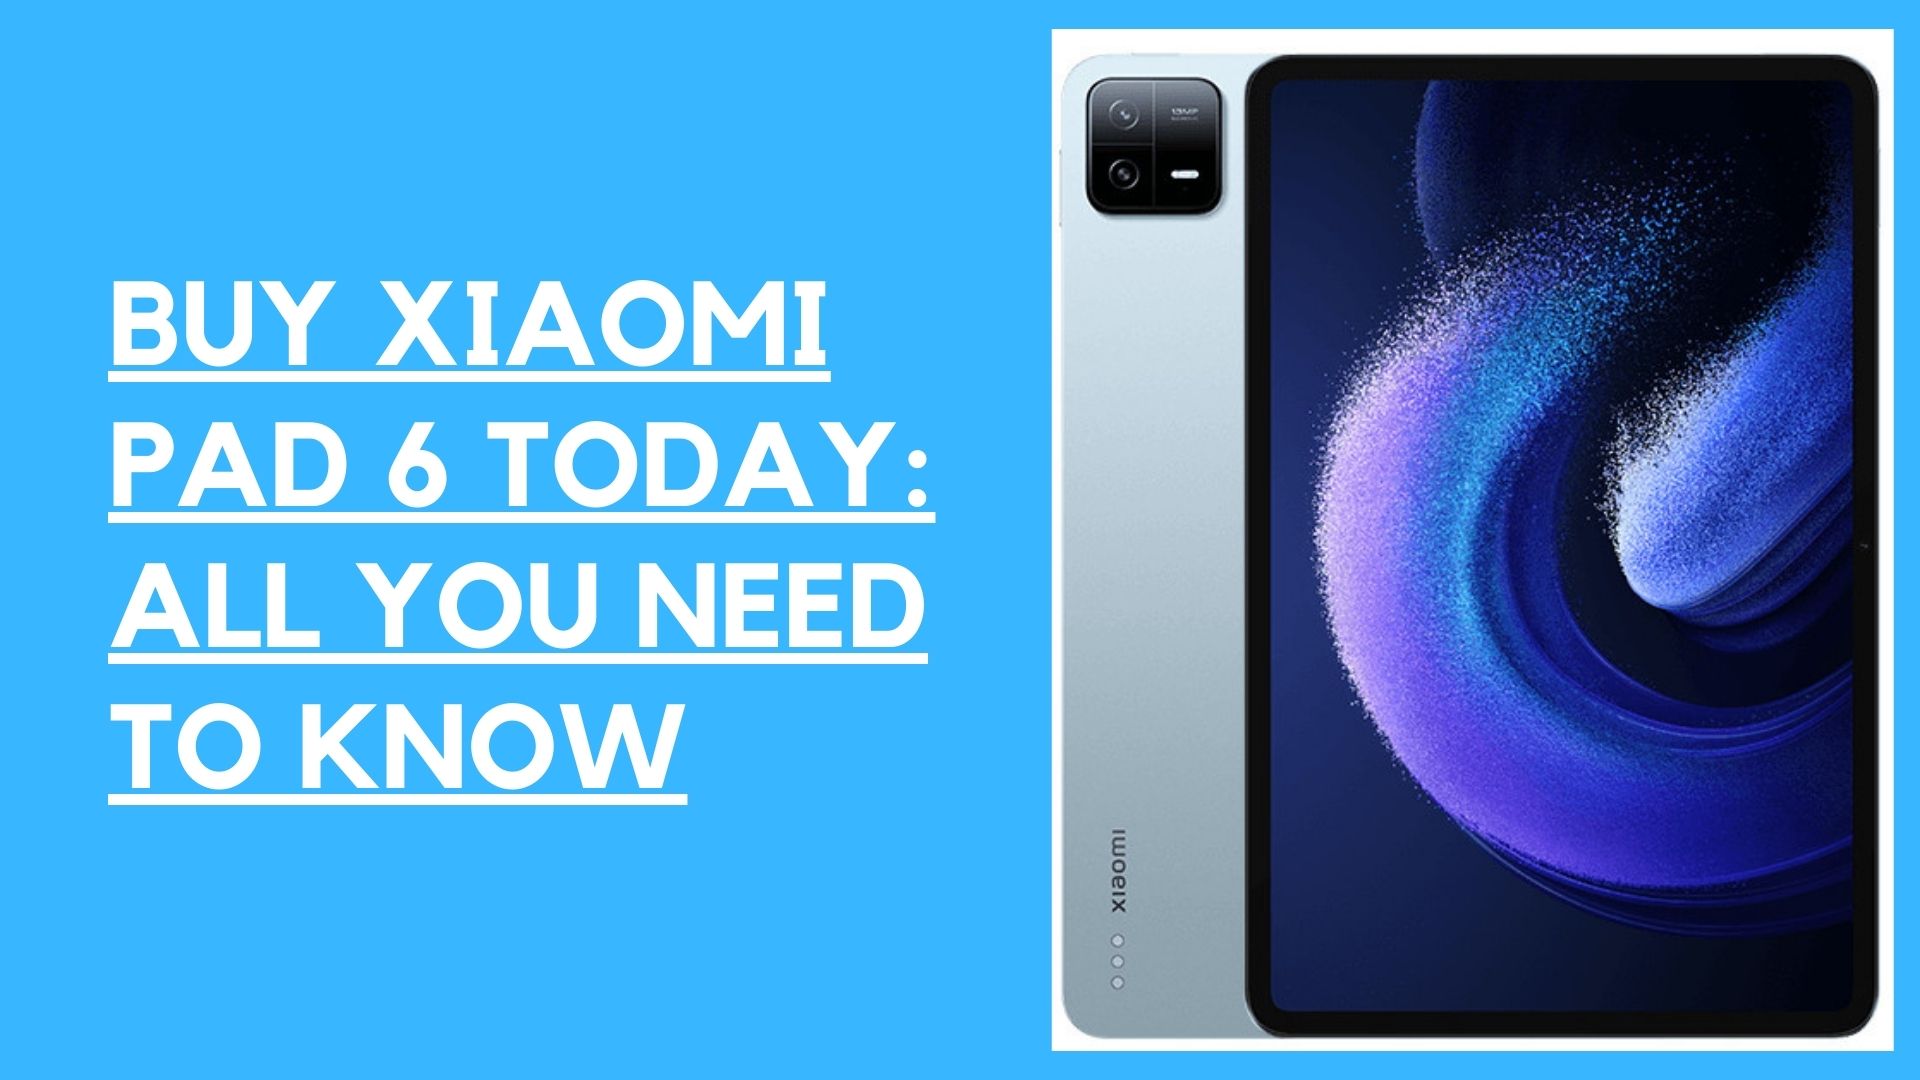 How to buy Xiaomi Pad 6 today